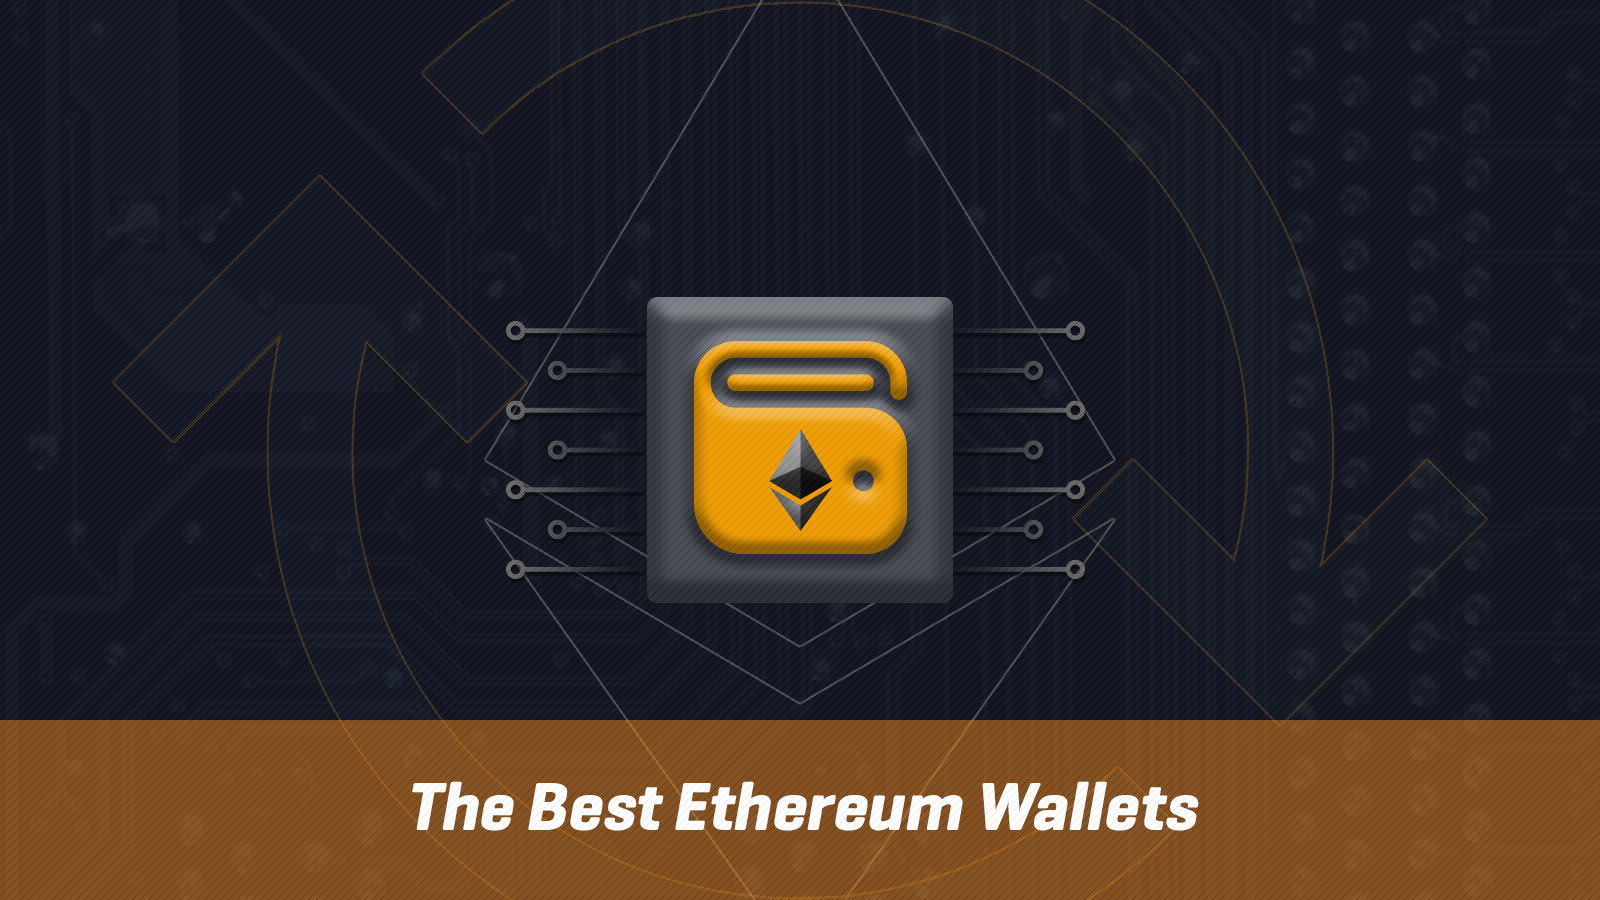 What are the Best Ethereum Wallets?